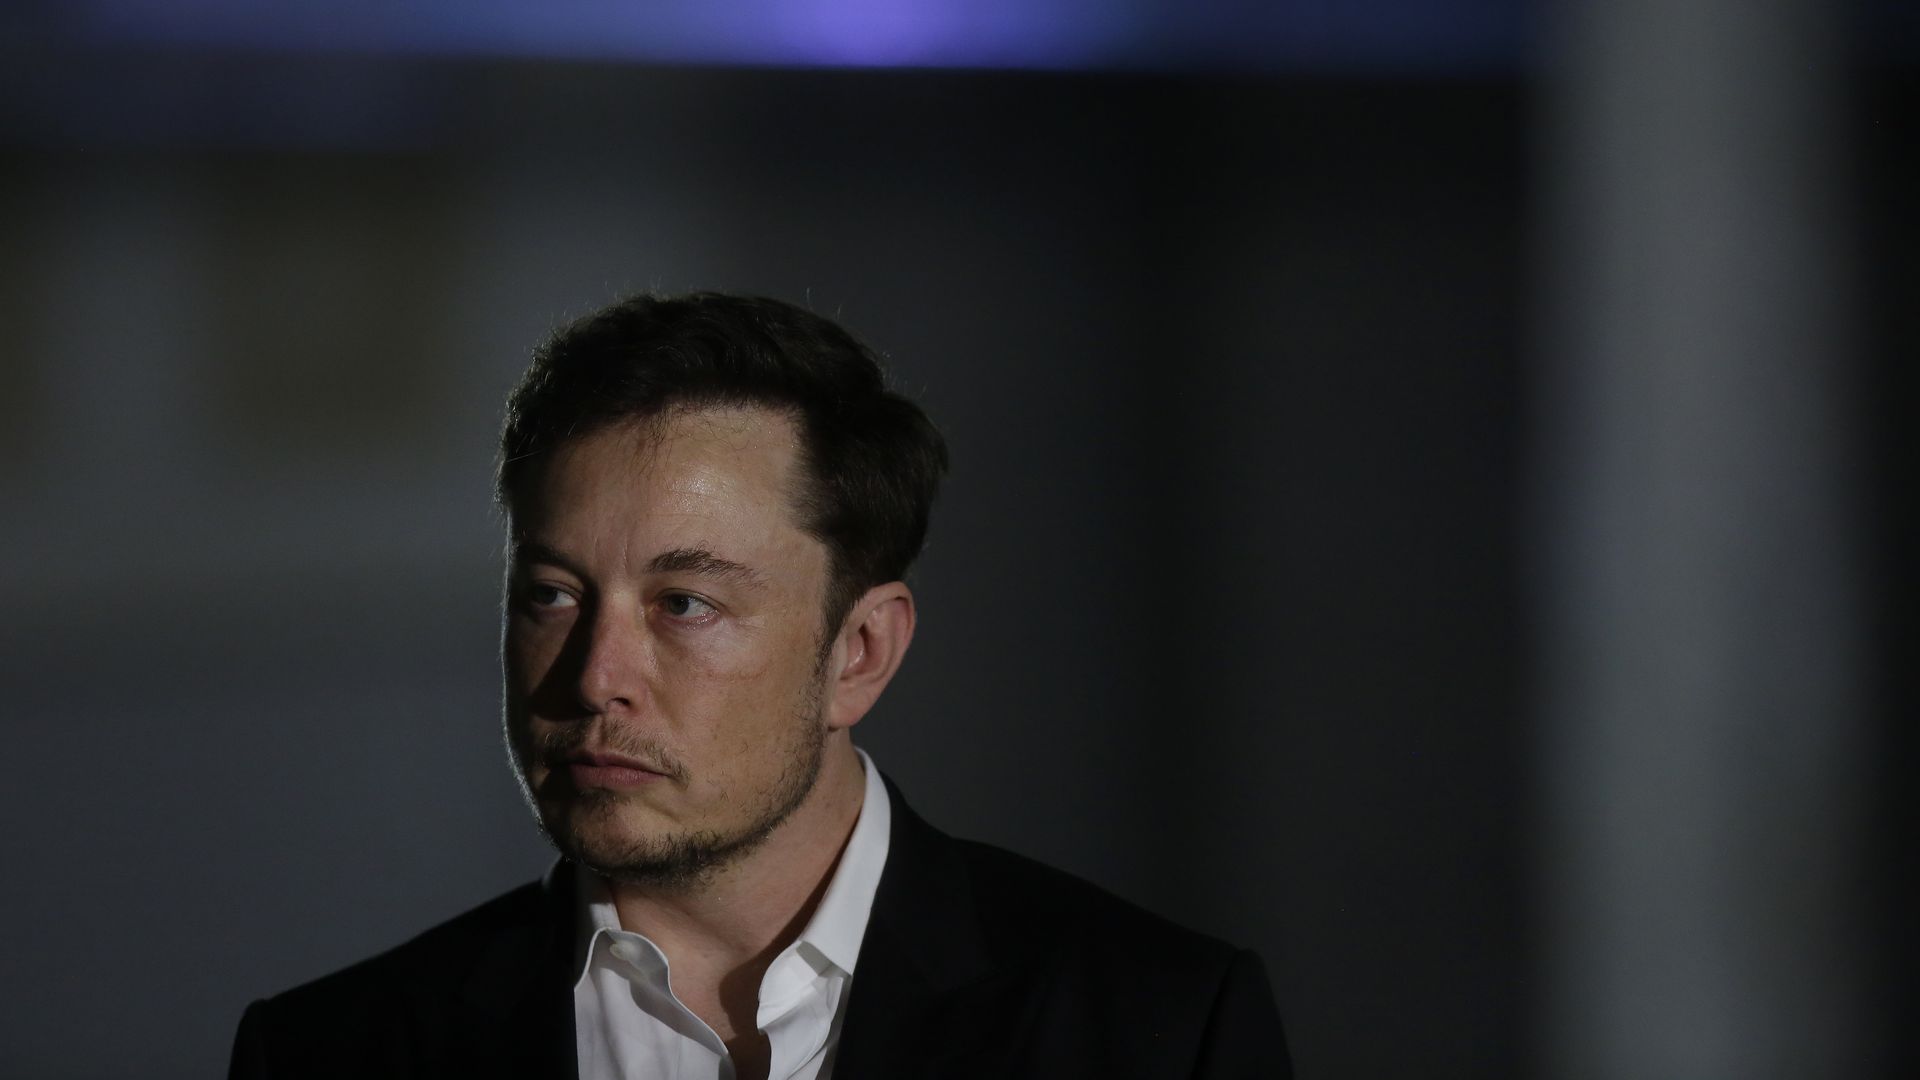 Elon Musk is accused by the SEC of violating his October 2018 fraud settlement with the regulator.